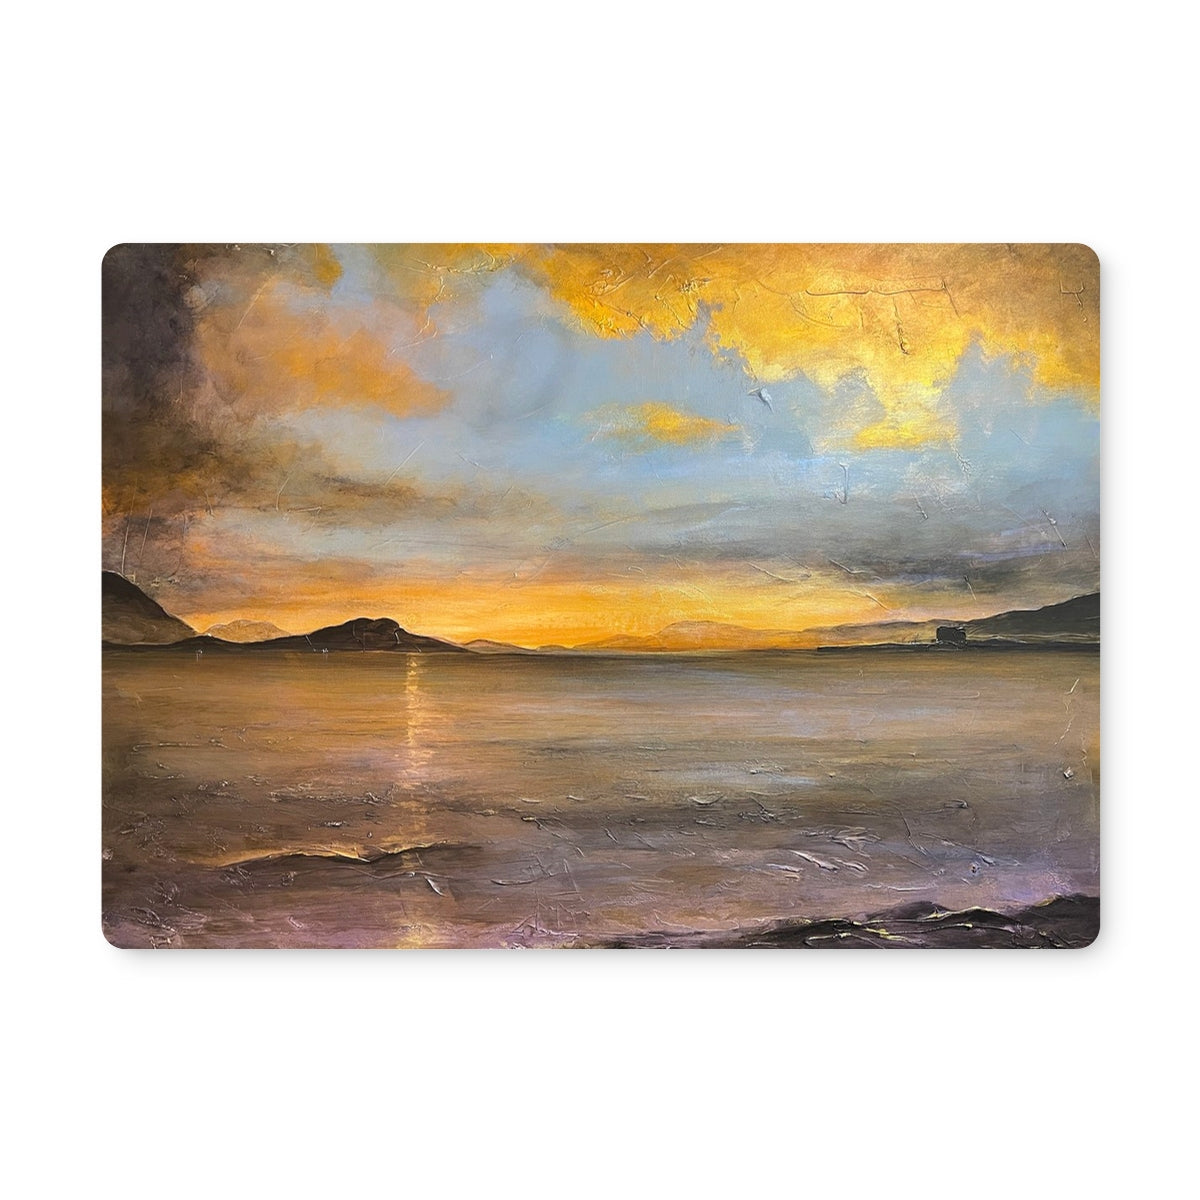 Loch Linnhe Sunset Art Gifts Placemat-Placemats-Scottish Lochs & Mountains Art Gallery-Single Placemat-Paintings, Prints, Homeware, Art Gifts From Scotland By Scottish Artist Kevin Hunter